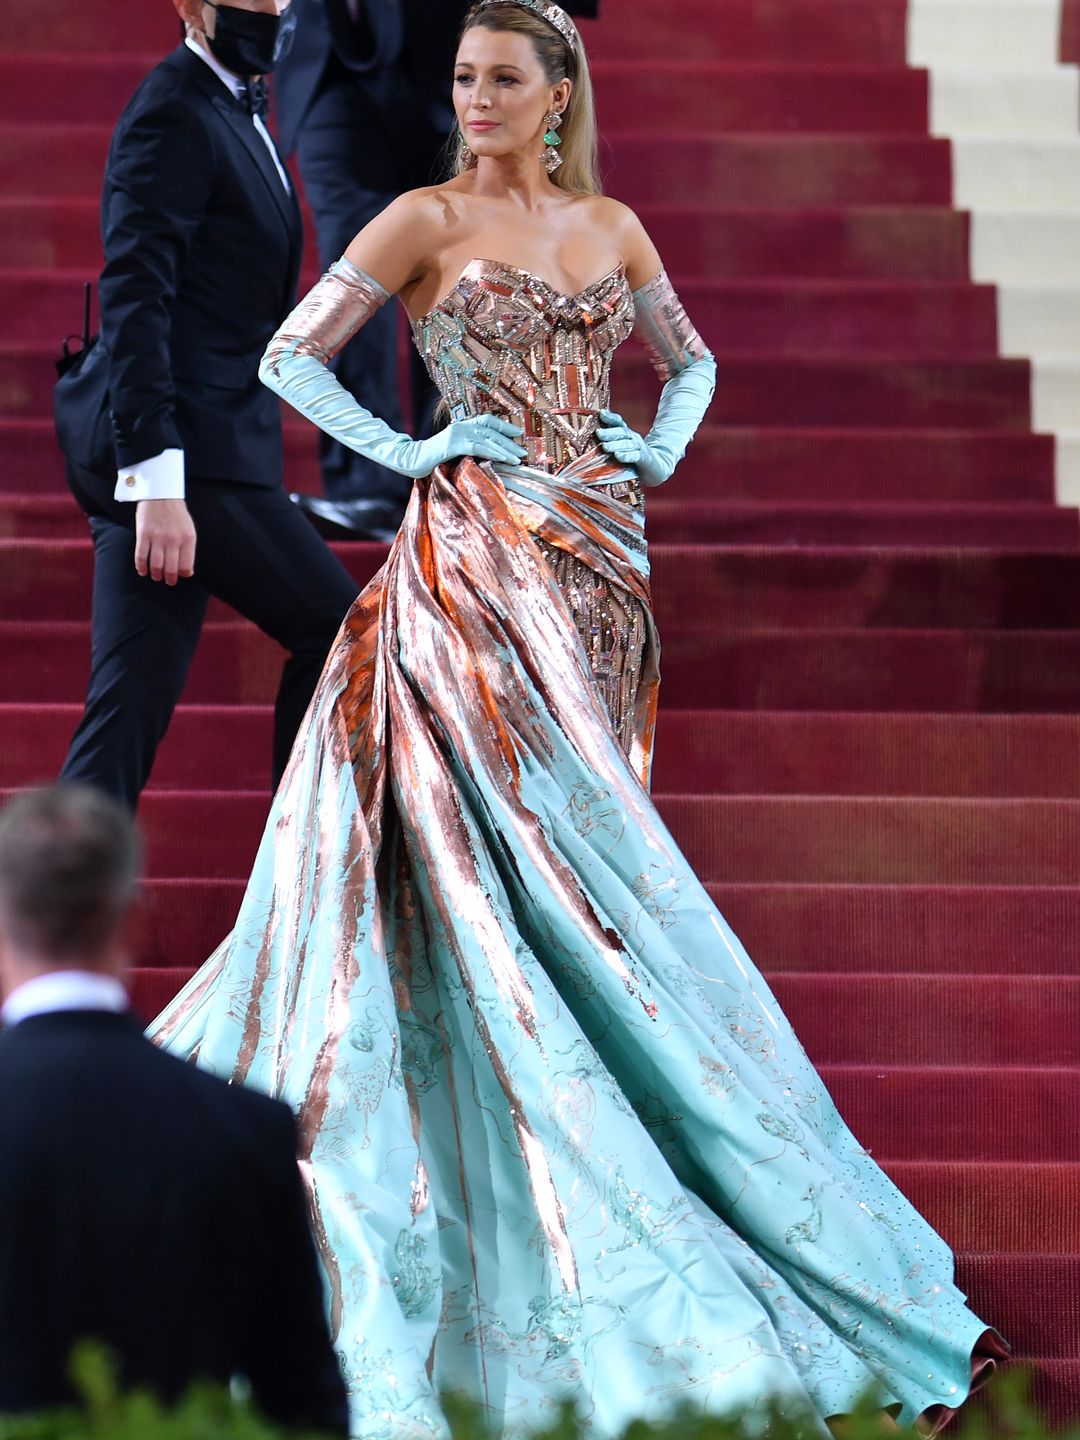 Blake Lively stood on red carpet steps posing in her long pink and green glittery gown